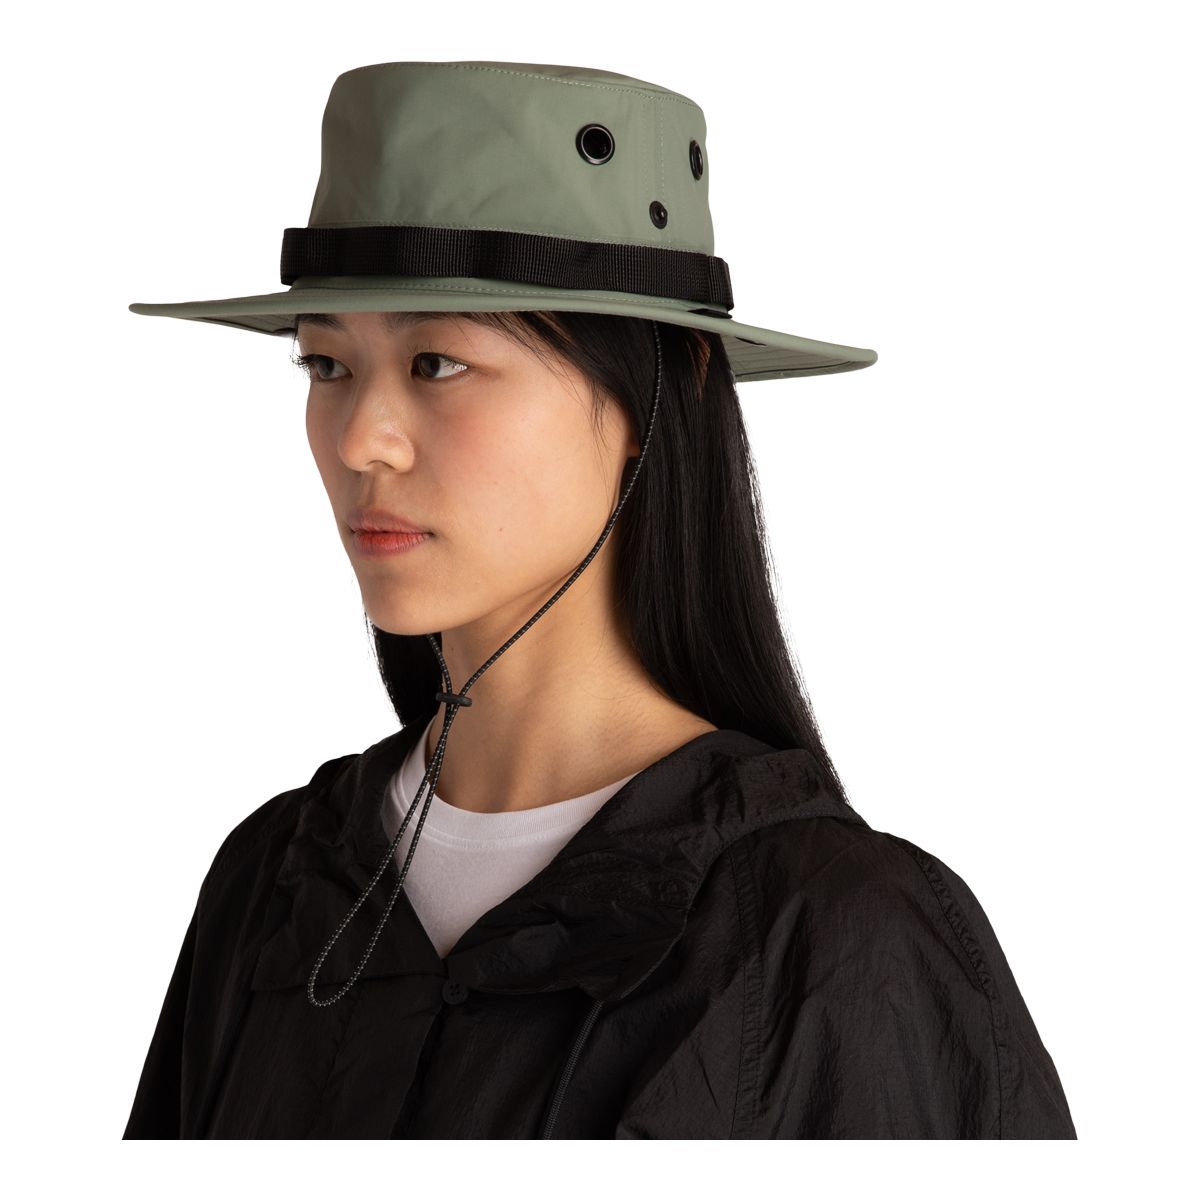 https://media-www.atmosphere.ca/product/div-03-softgoods/dpt-79-clothing-accessories/sdpt-01-mens/334093549/tilley-men-s-utility-hat-88df89d4-0664-4bdd-a88b-daa0212add8b-jpgrendition.jpg?imdensity=1&imwidth=1244&impolicy=mZoom